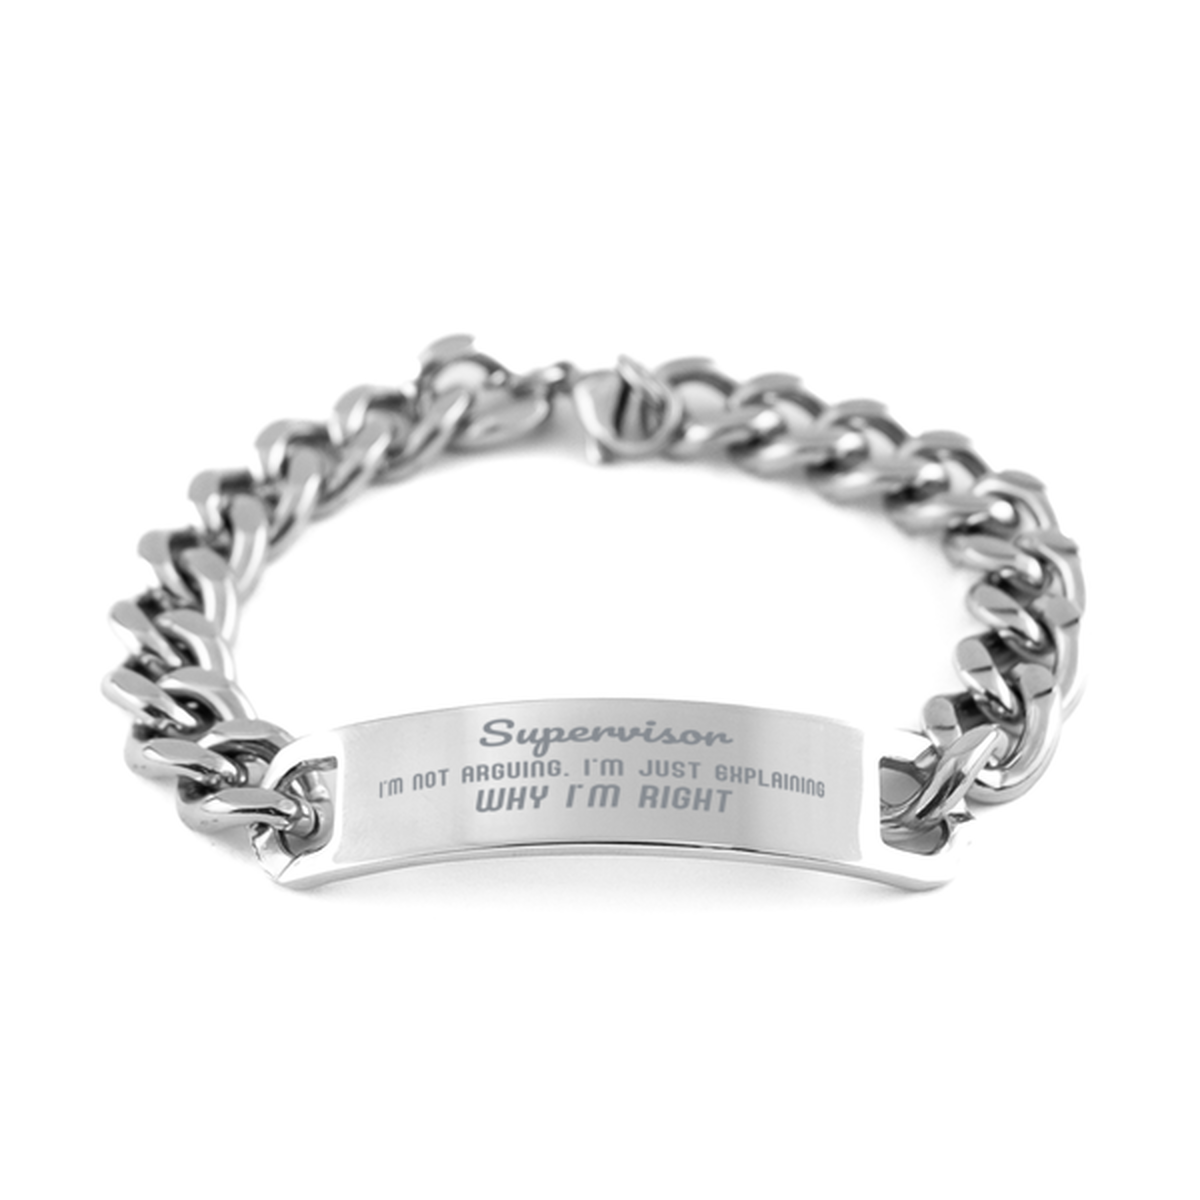 Supervisor I'm not Arguing. I'm Just Explaining Why I'm RIGHT Cuban Chain Stainless Steel Bracelet, Graduation Birthday Christmas Supervisor Gifts For Supervisor Funny Saying Quote Present for Men Women Coworker